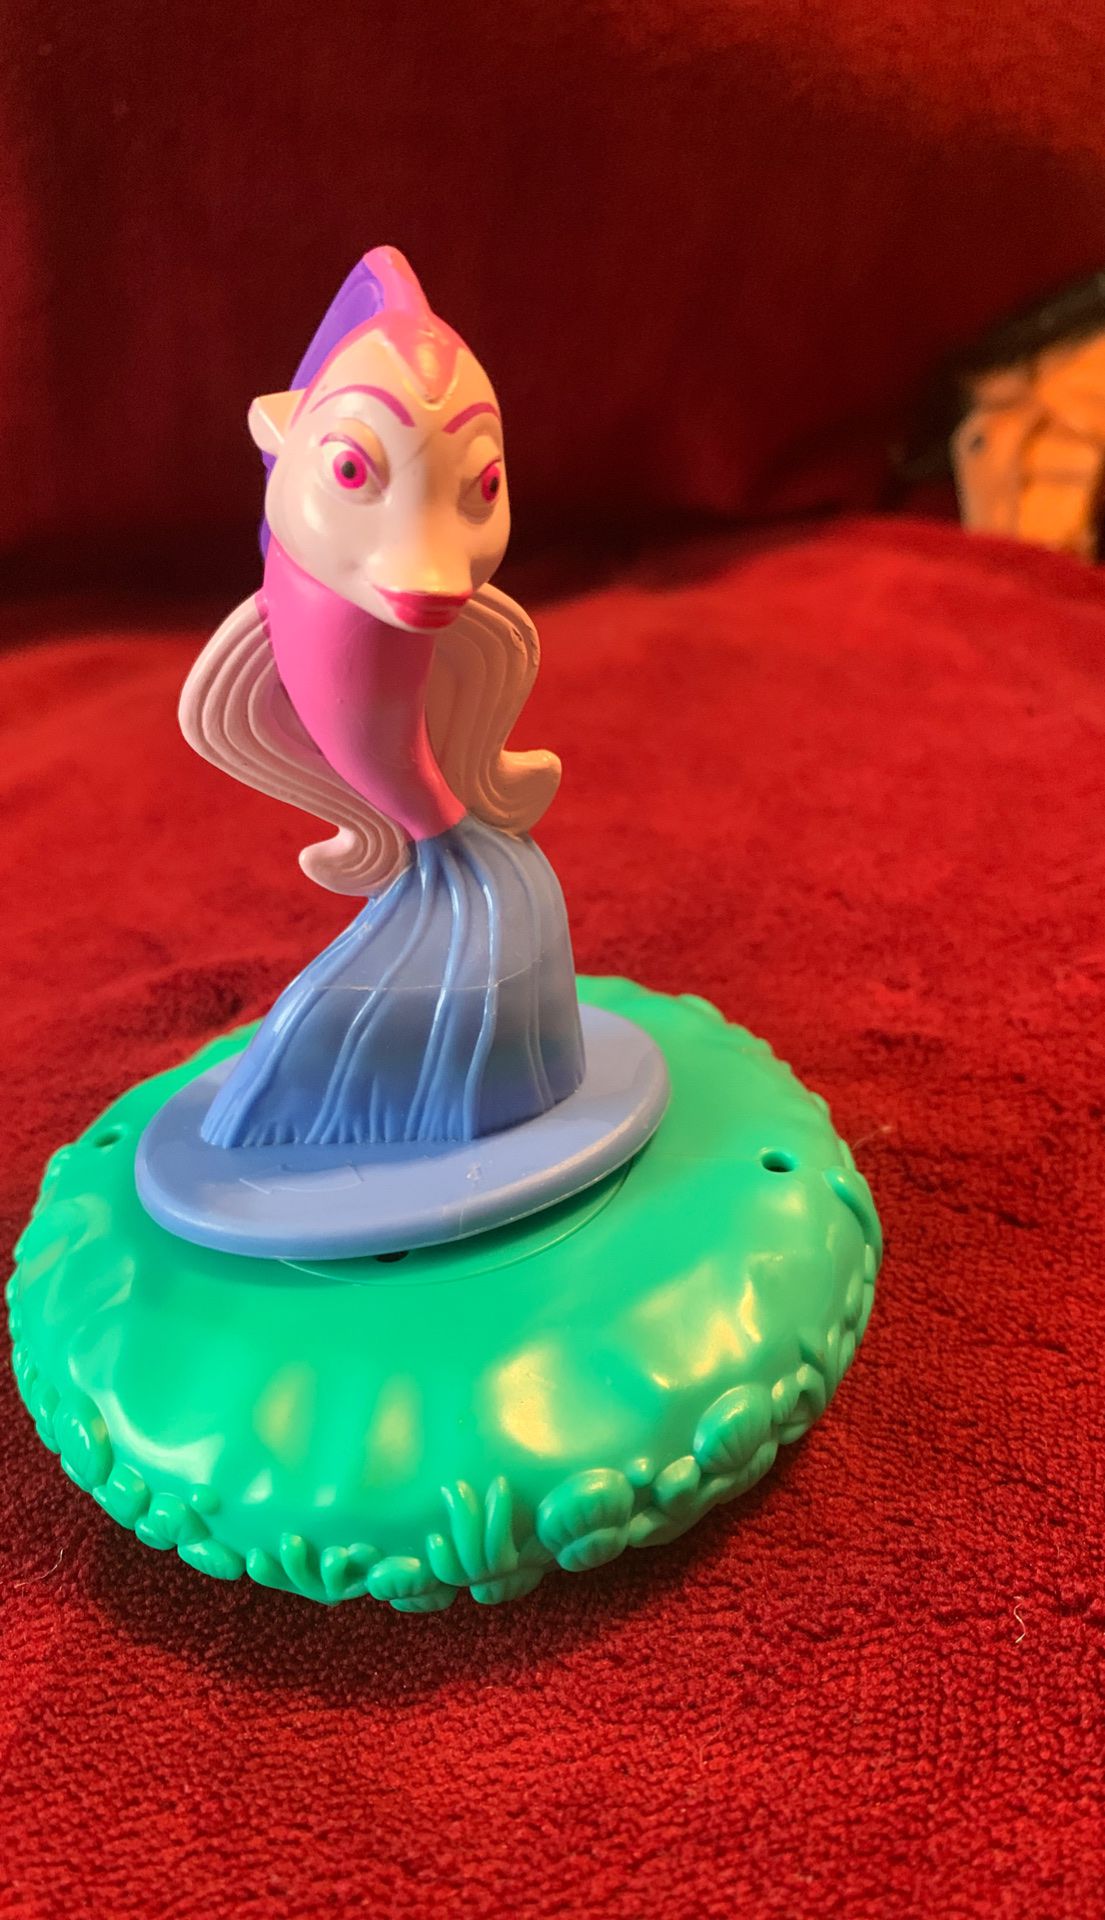 2004 Burger King shark tale spinning toy